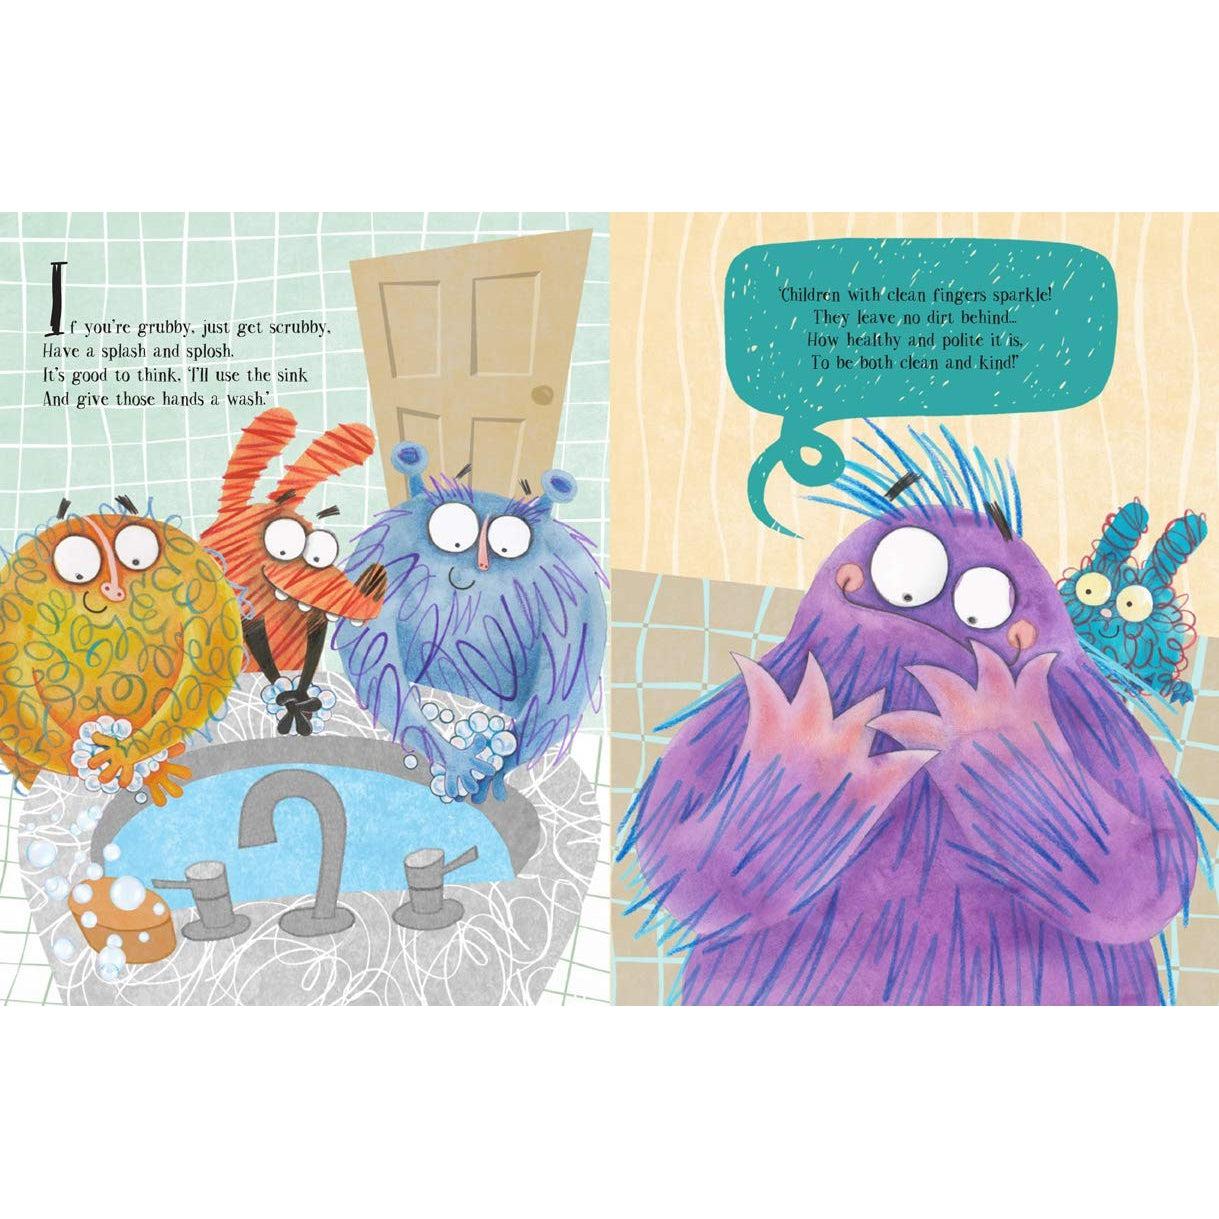 Wash Those Hands! (The Scribble Monsters' Guide To Modern Manners) - John Townsend & Carolyn Scrace